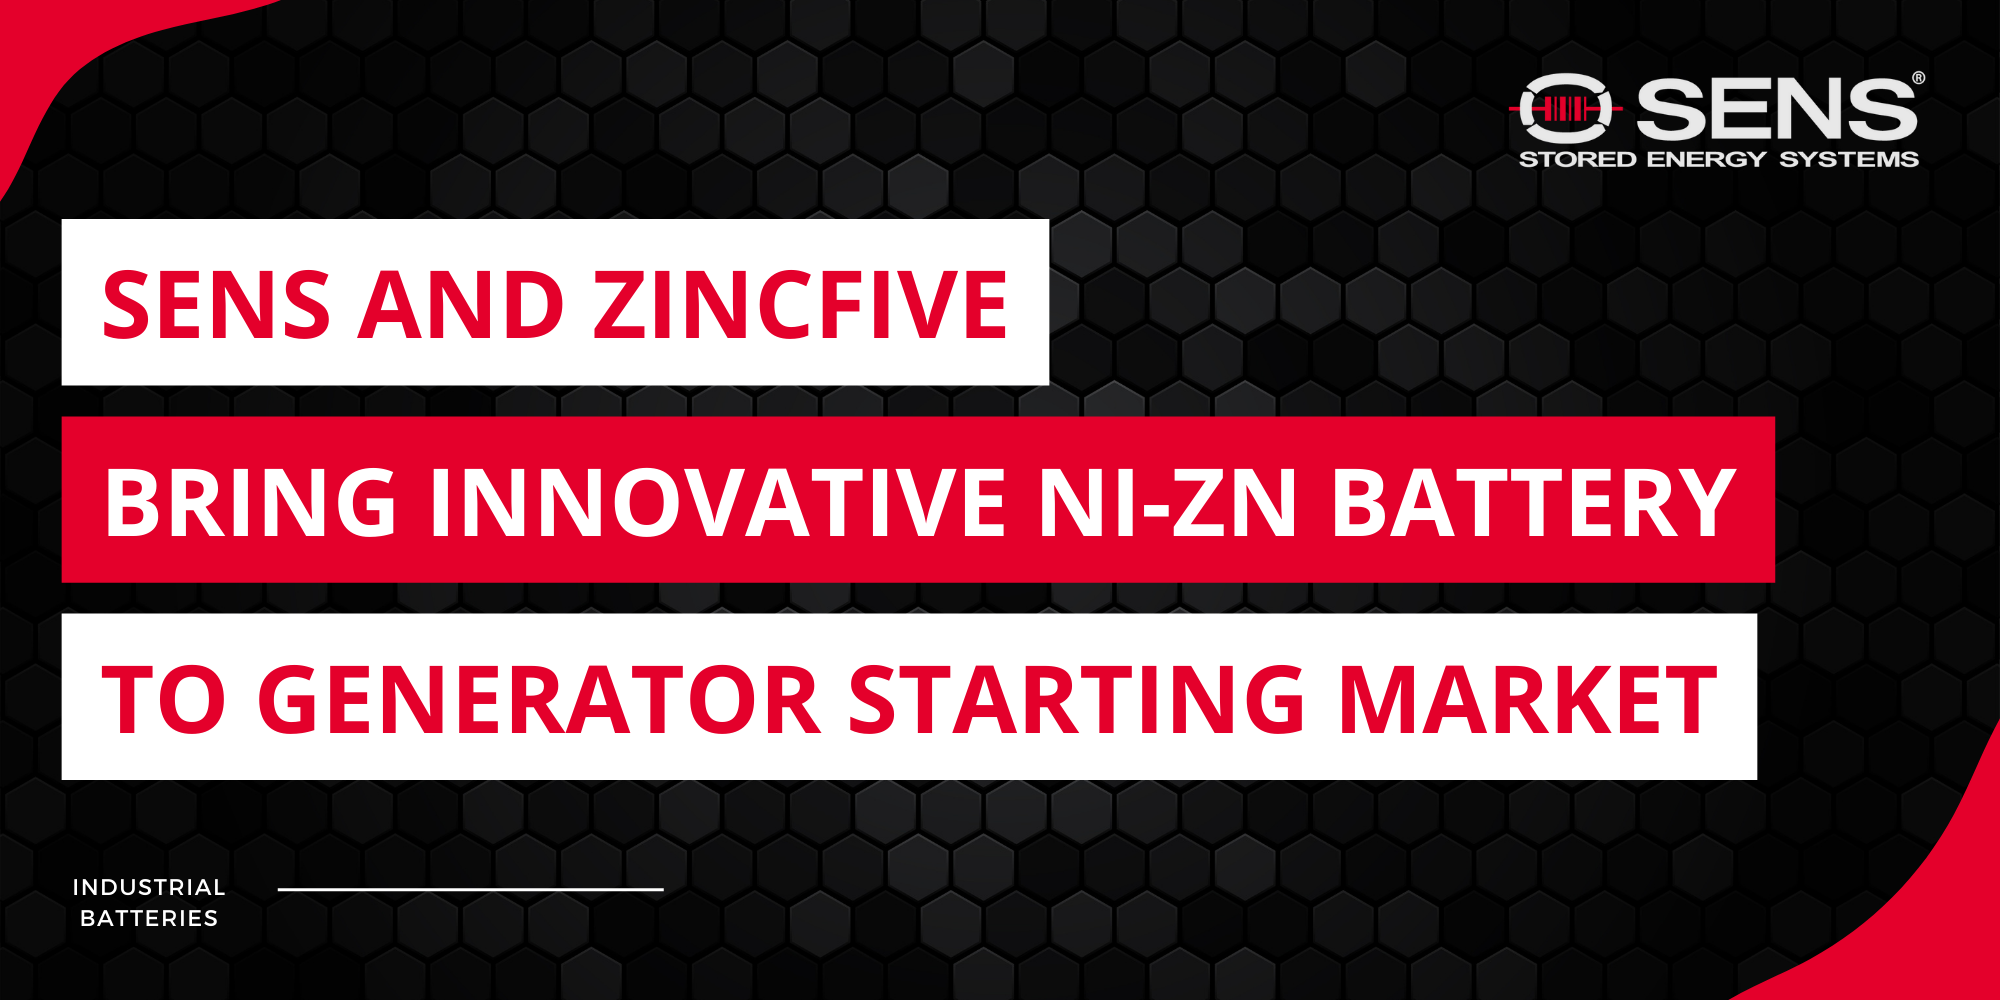  SENS and ZincFive Bring Innovative Nickel-Zinc Battery Starter Solution to Industrial Generator Starting Market Featured Image